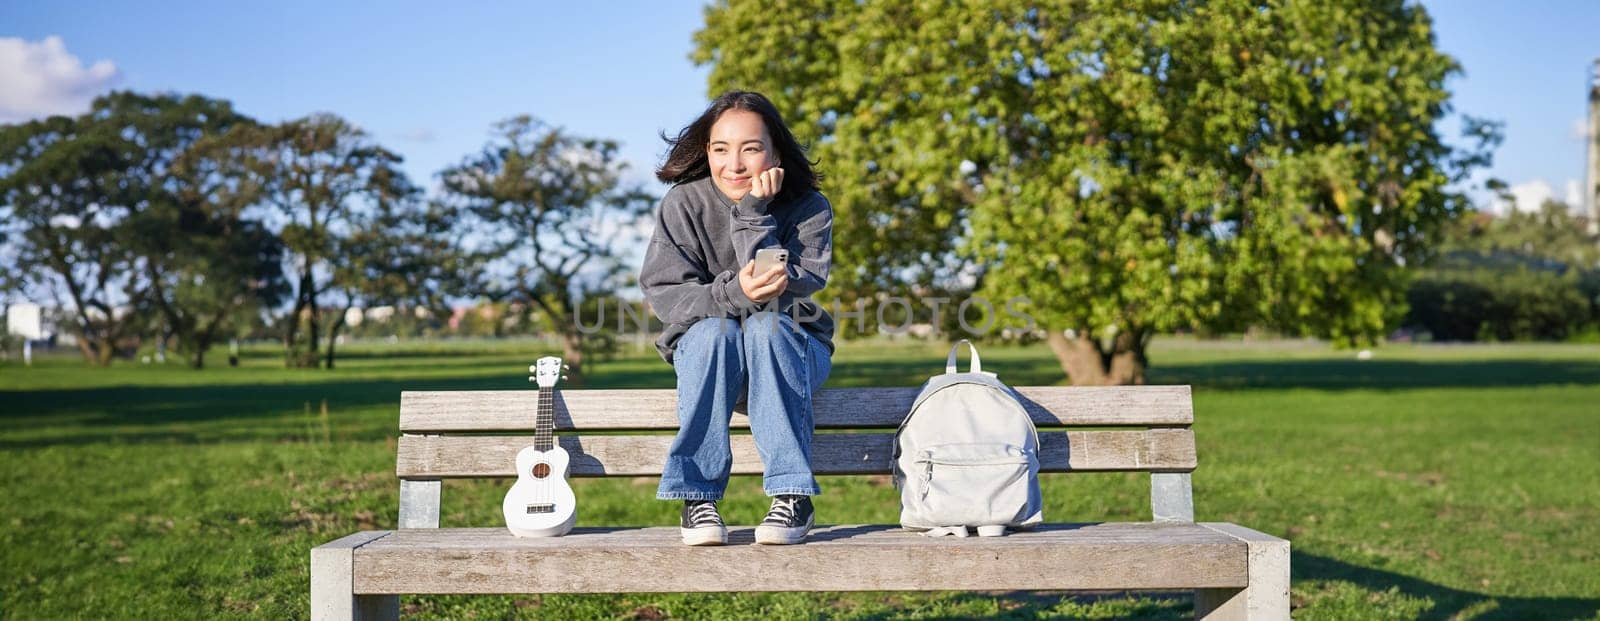 Young woman with ukulele, sitting on bench in park, using mobile phone app, holding smartphone and smiling.